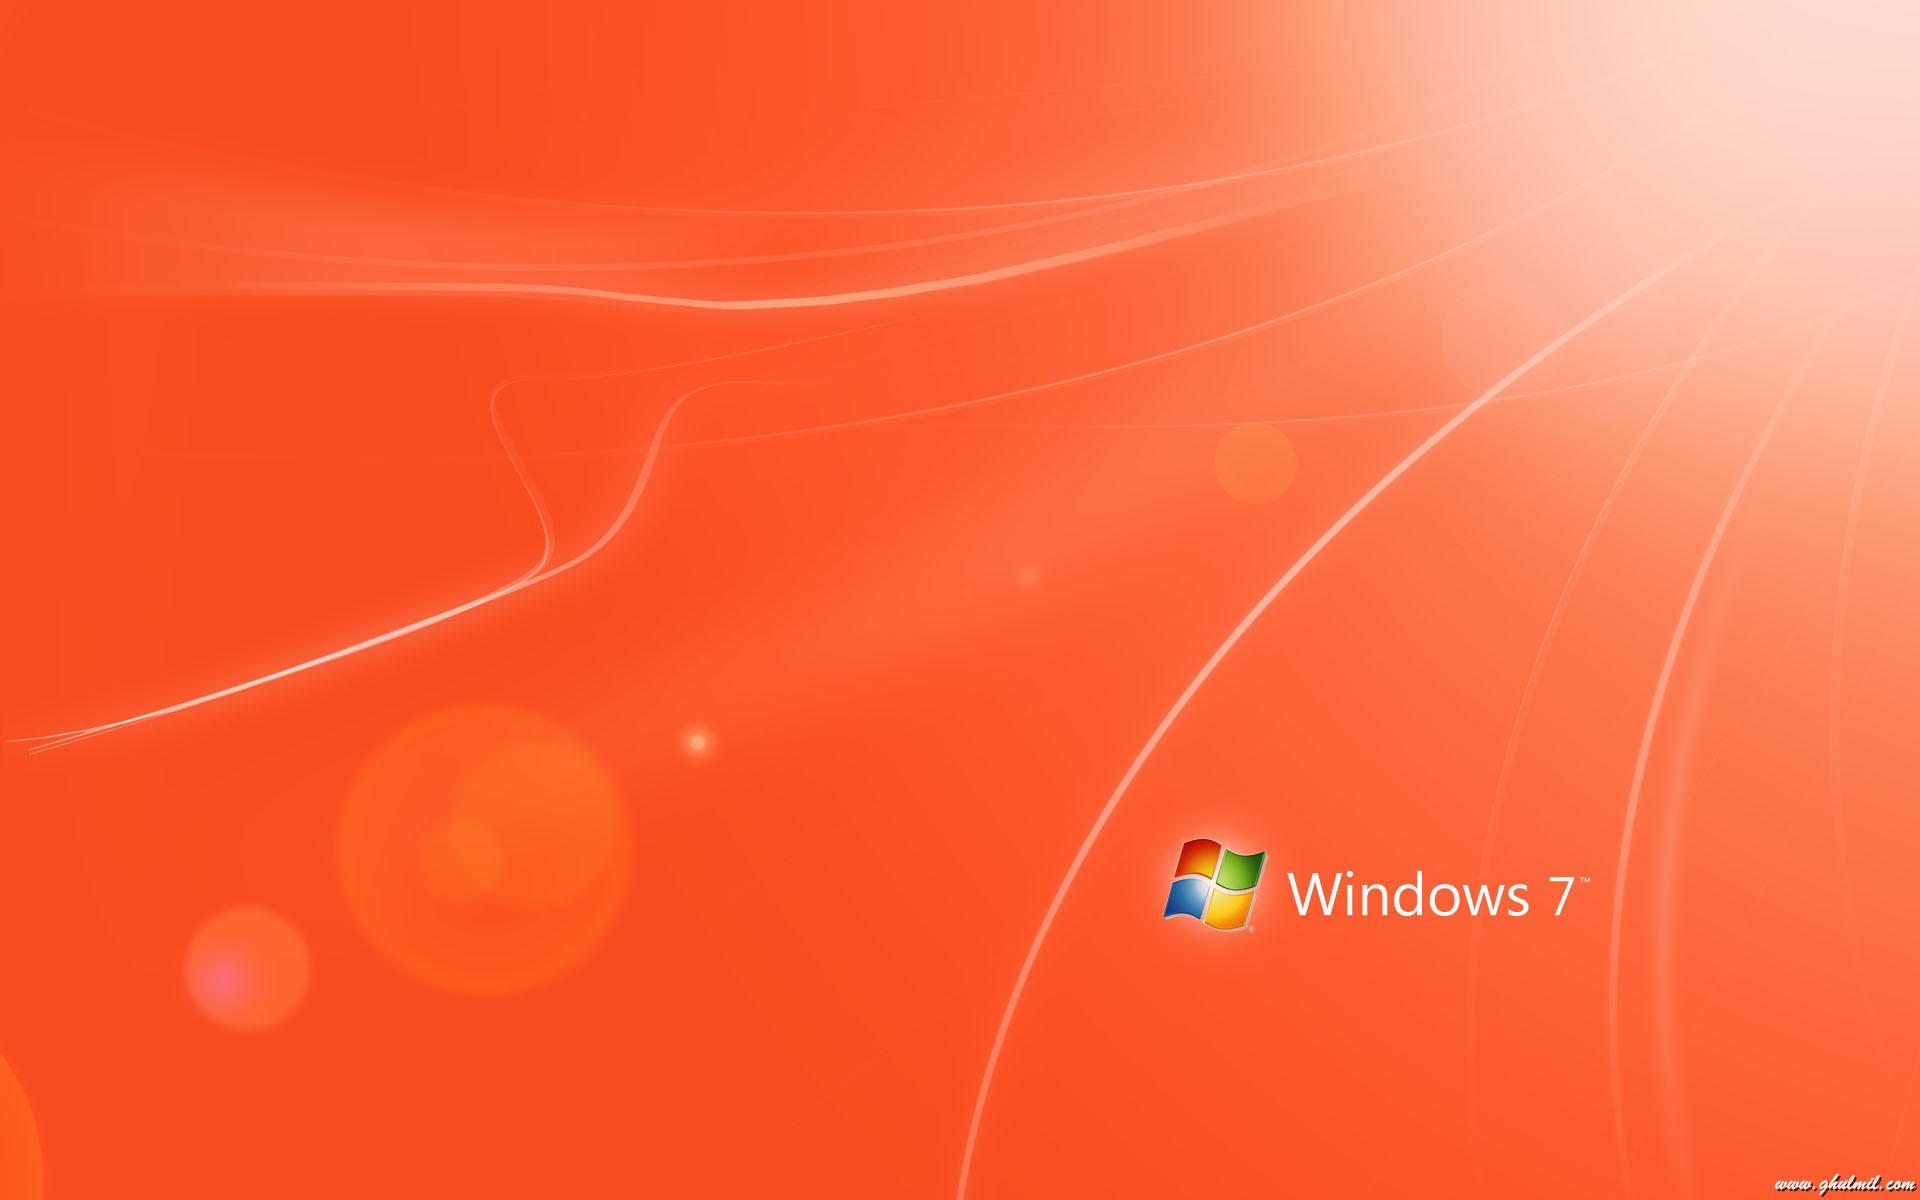 Multicolor Windows 7 Latest Wallpapers – HD Wallpapers Free Download